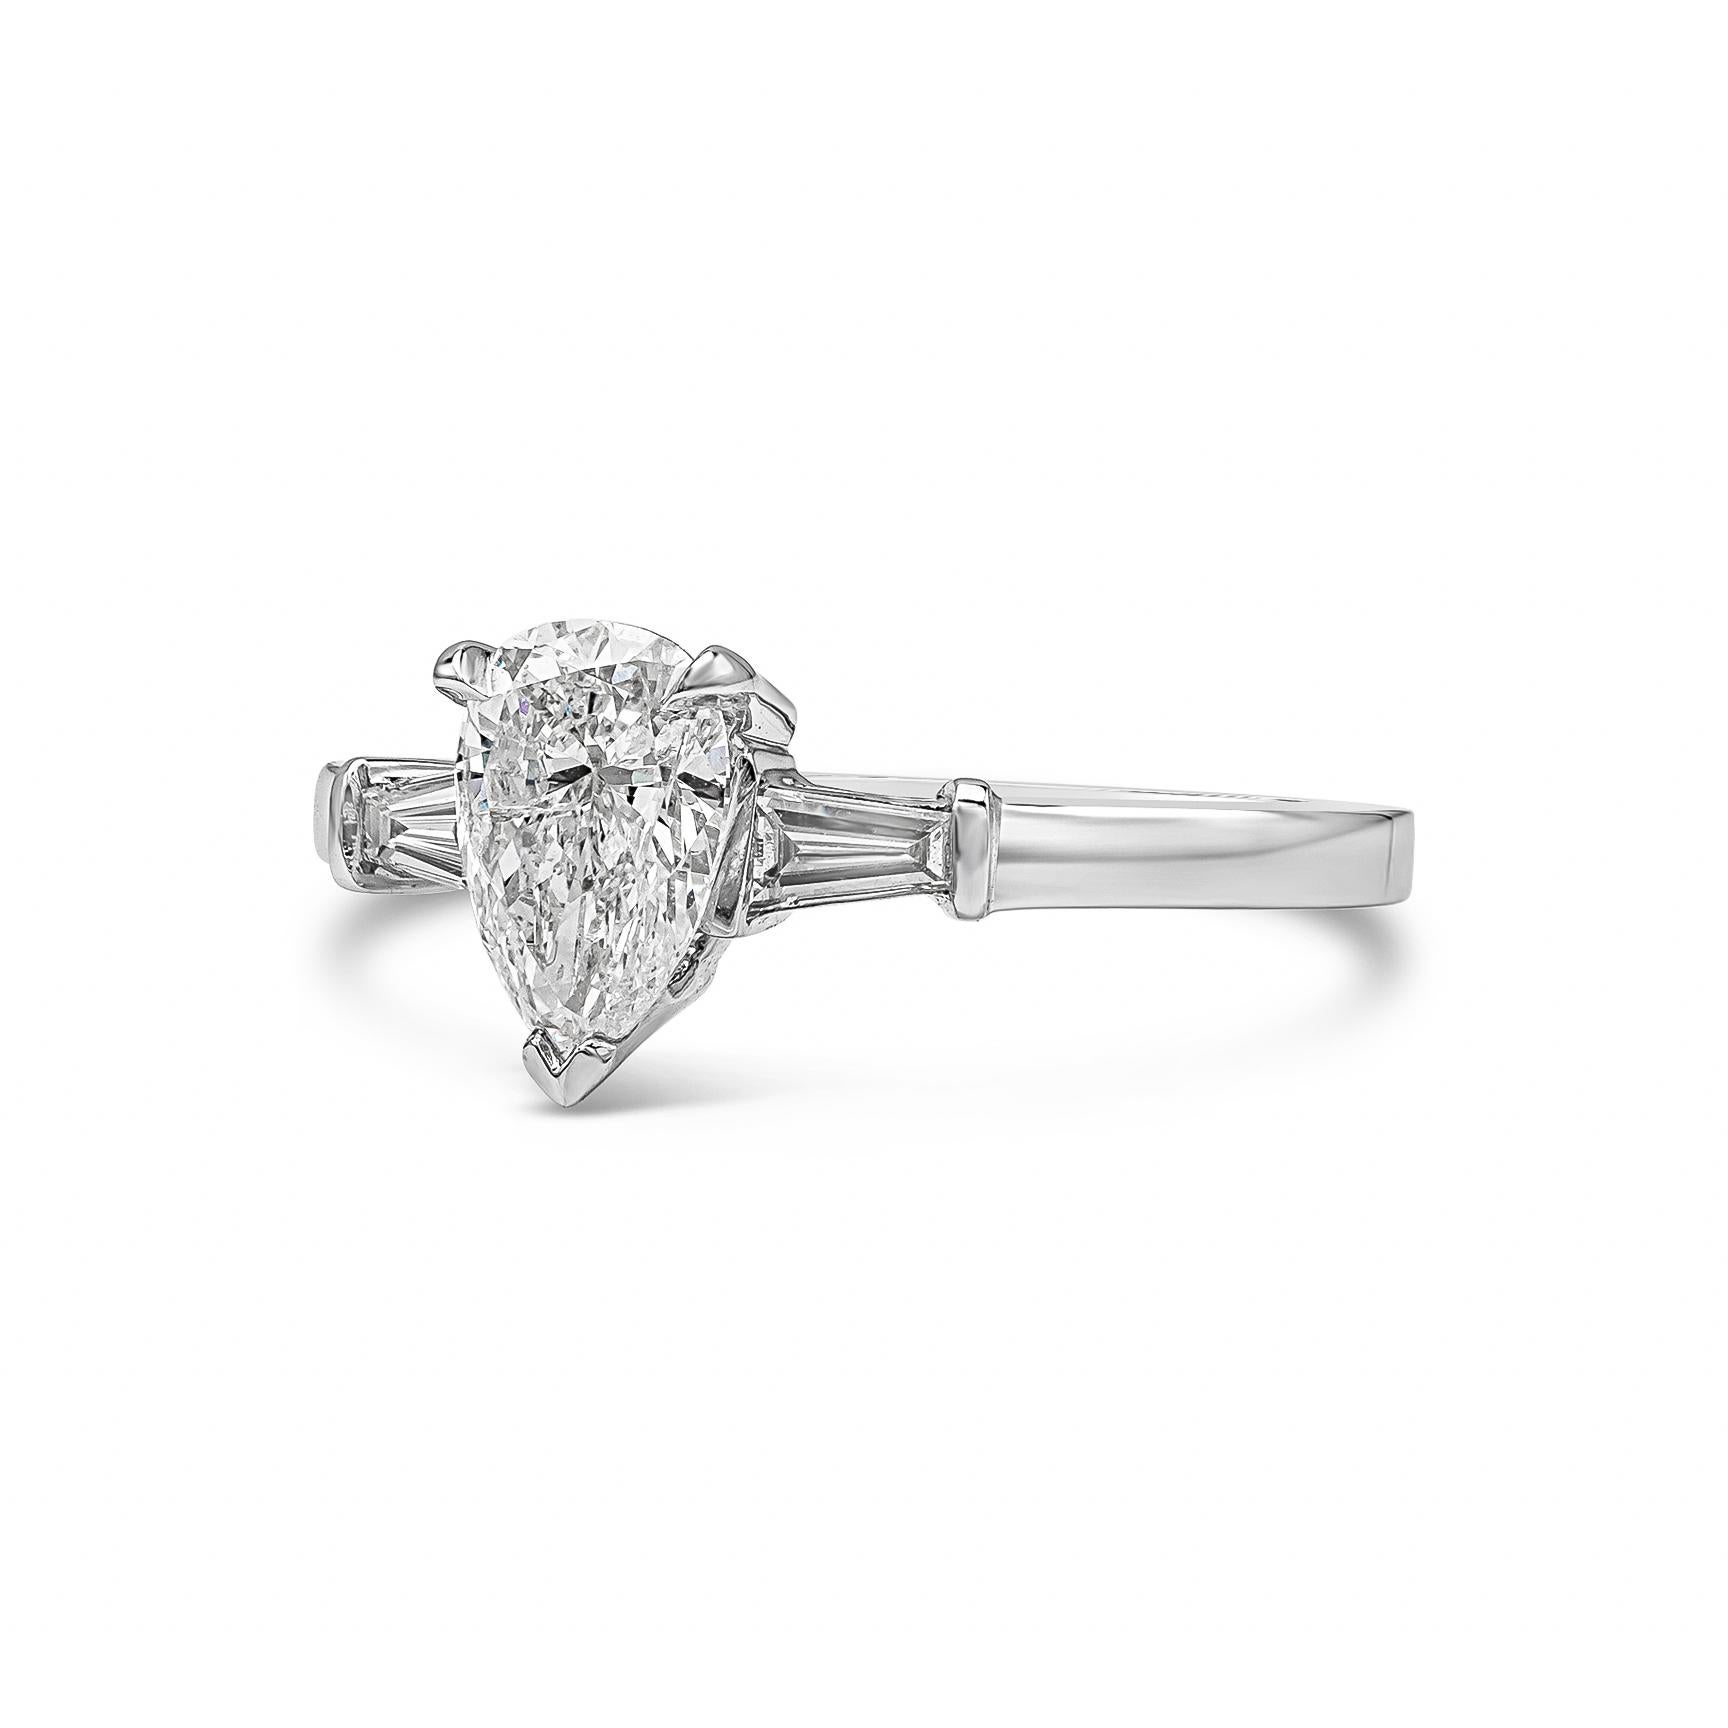 A timeless three stone engagement ring style showcasing a 1.01 carats pear shape diamond, flanked by two tapered baguette cut diamonds on each side weighing 0.18 carats total. Made in 18k white gold. Size 6.5 US adjustable upon request.

Roman